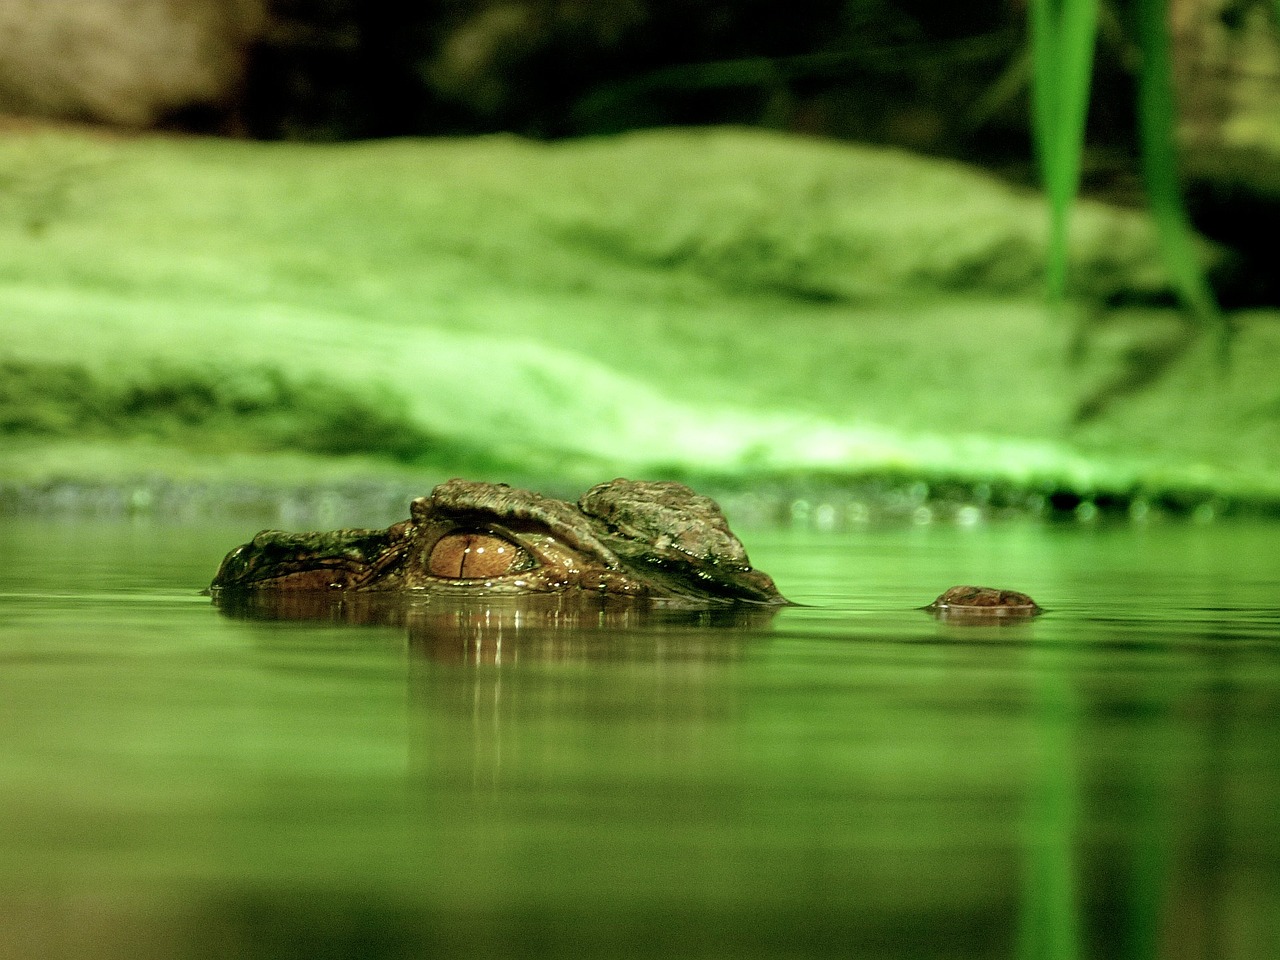 a large alligator sitting on top of a body of water, a picture, sumatraism, mobile wallpaper, green snakes background, brown water, radioactive swamp